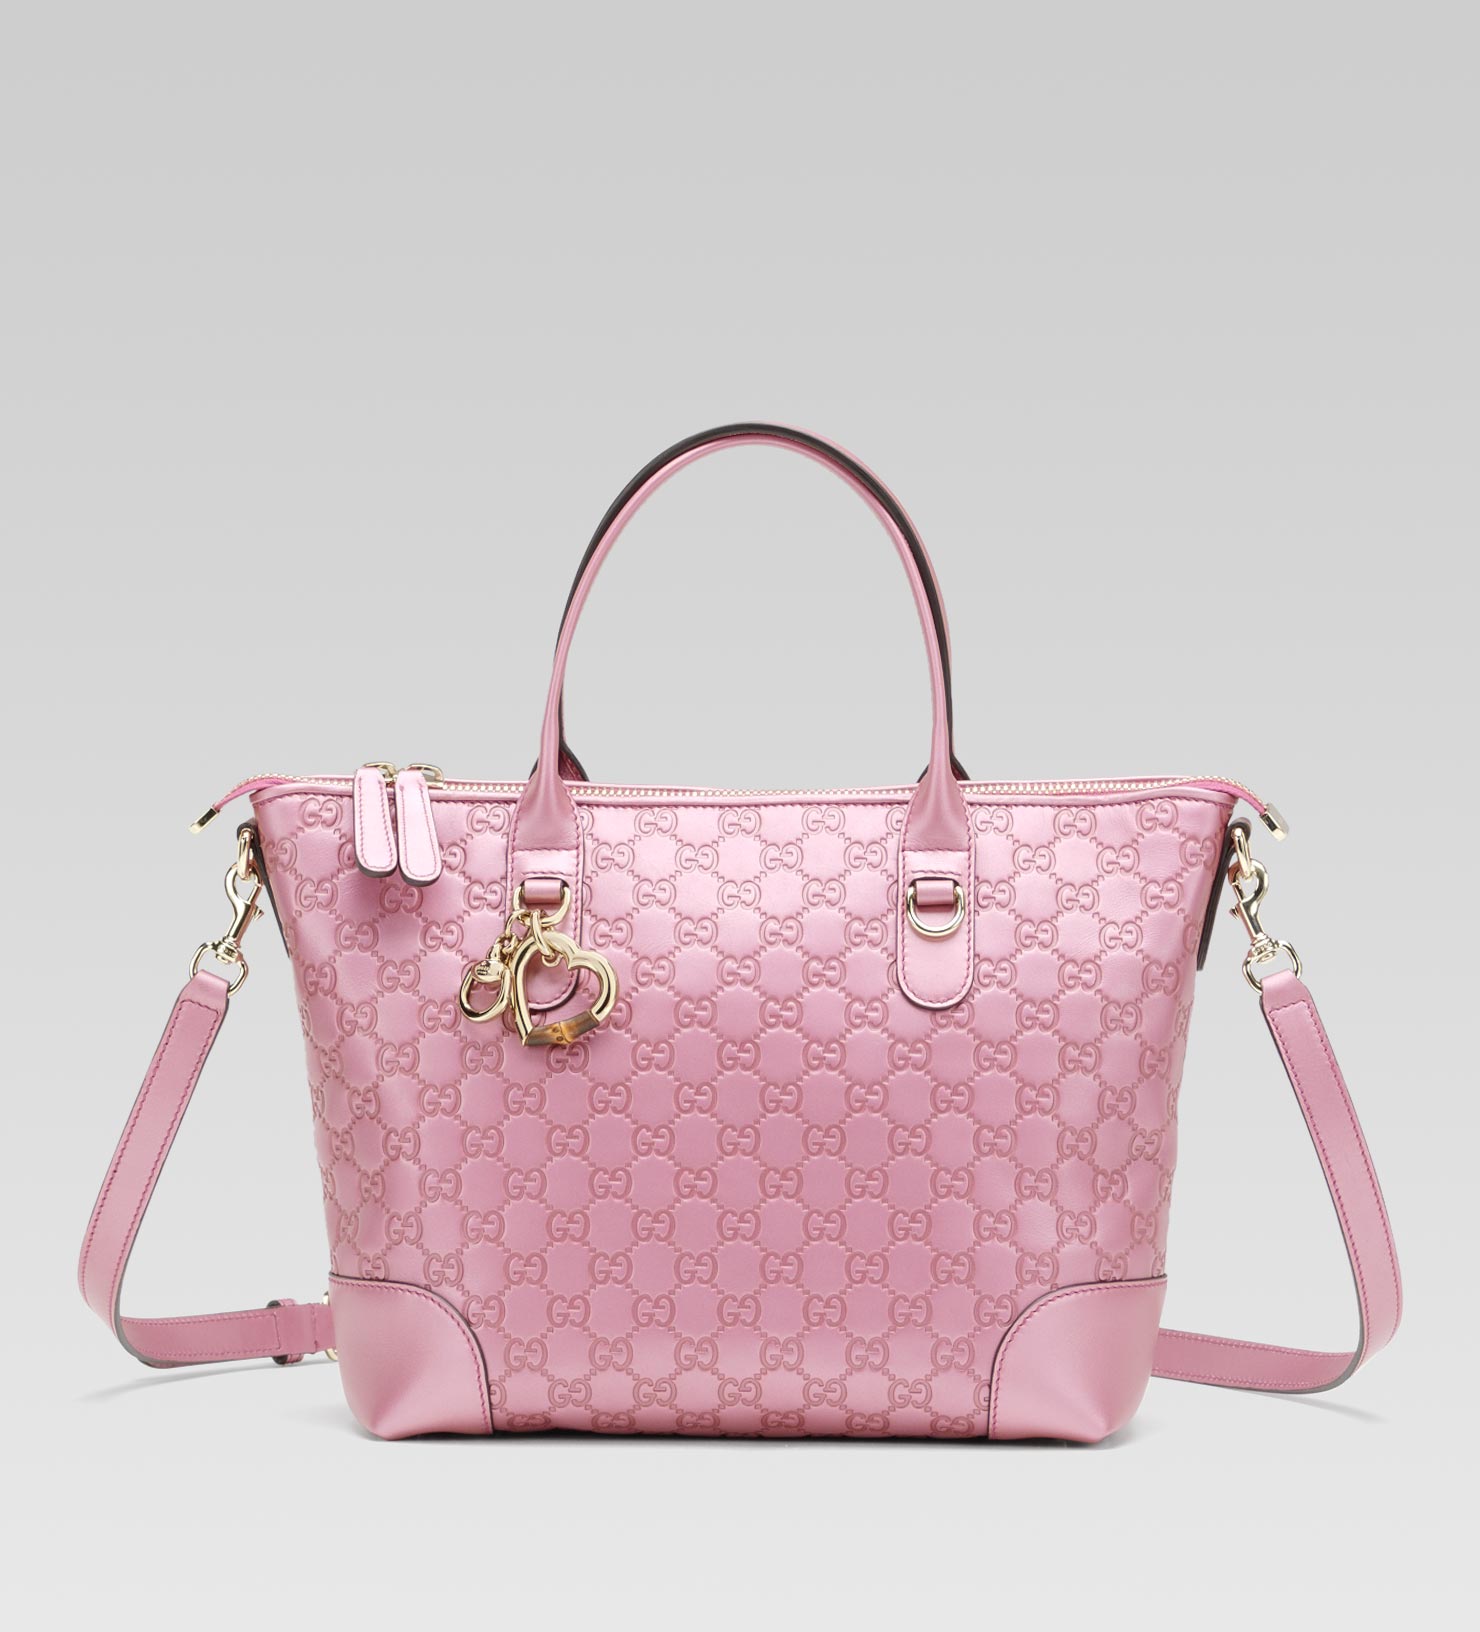 Gucci Heart Bit Charm Top Handle Bag in Rose (Pink) - Lyst